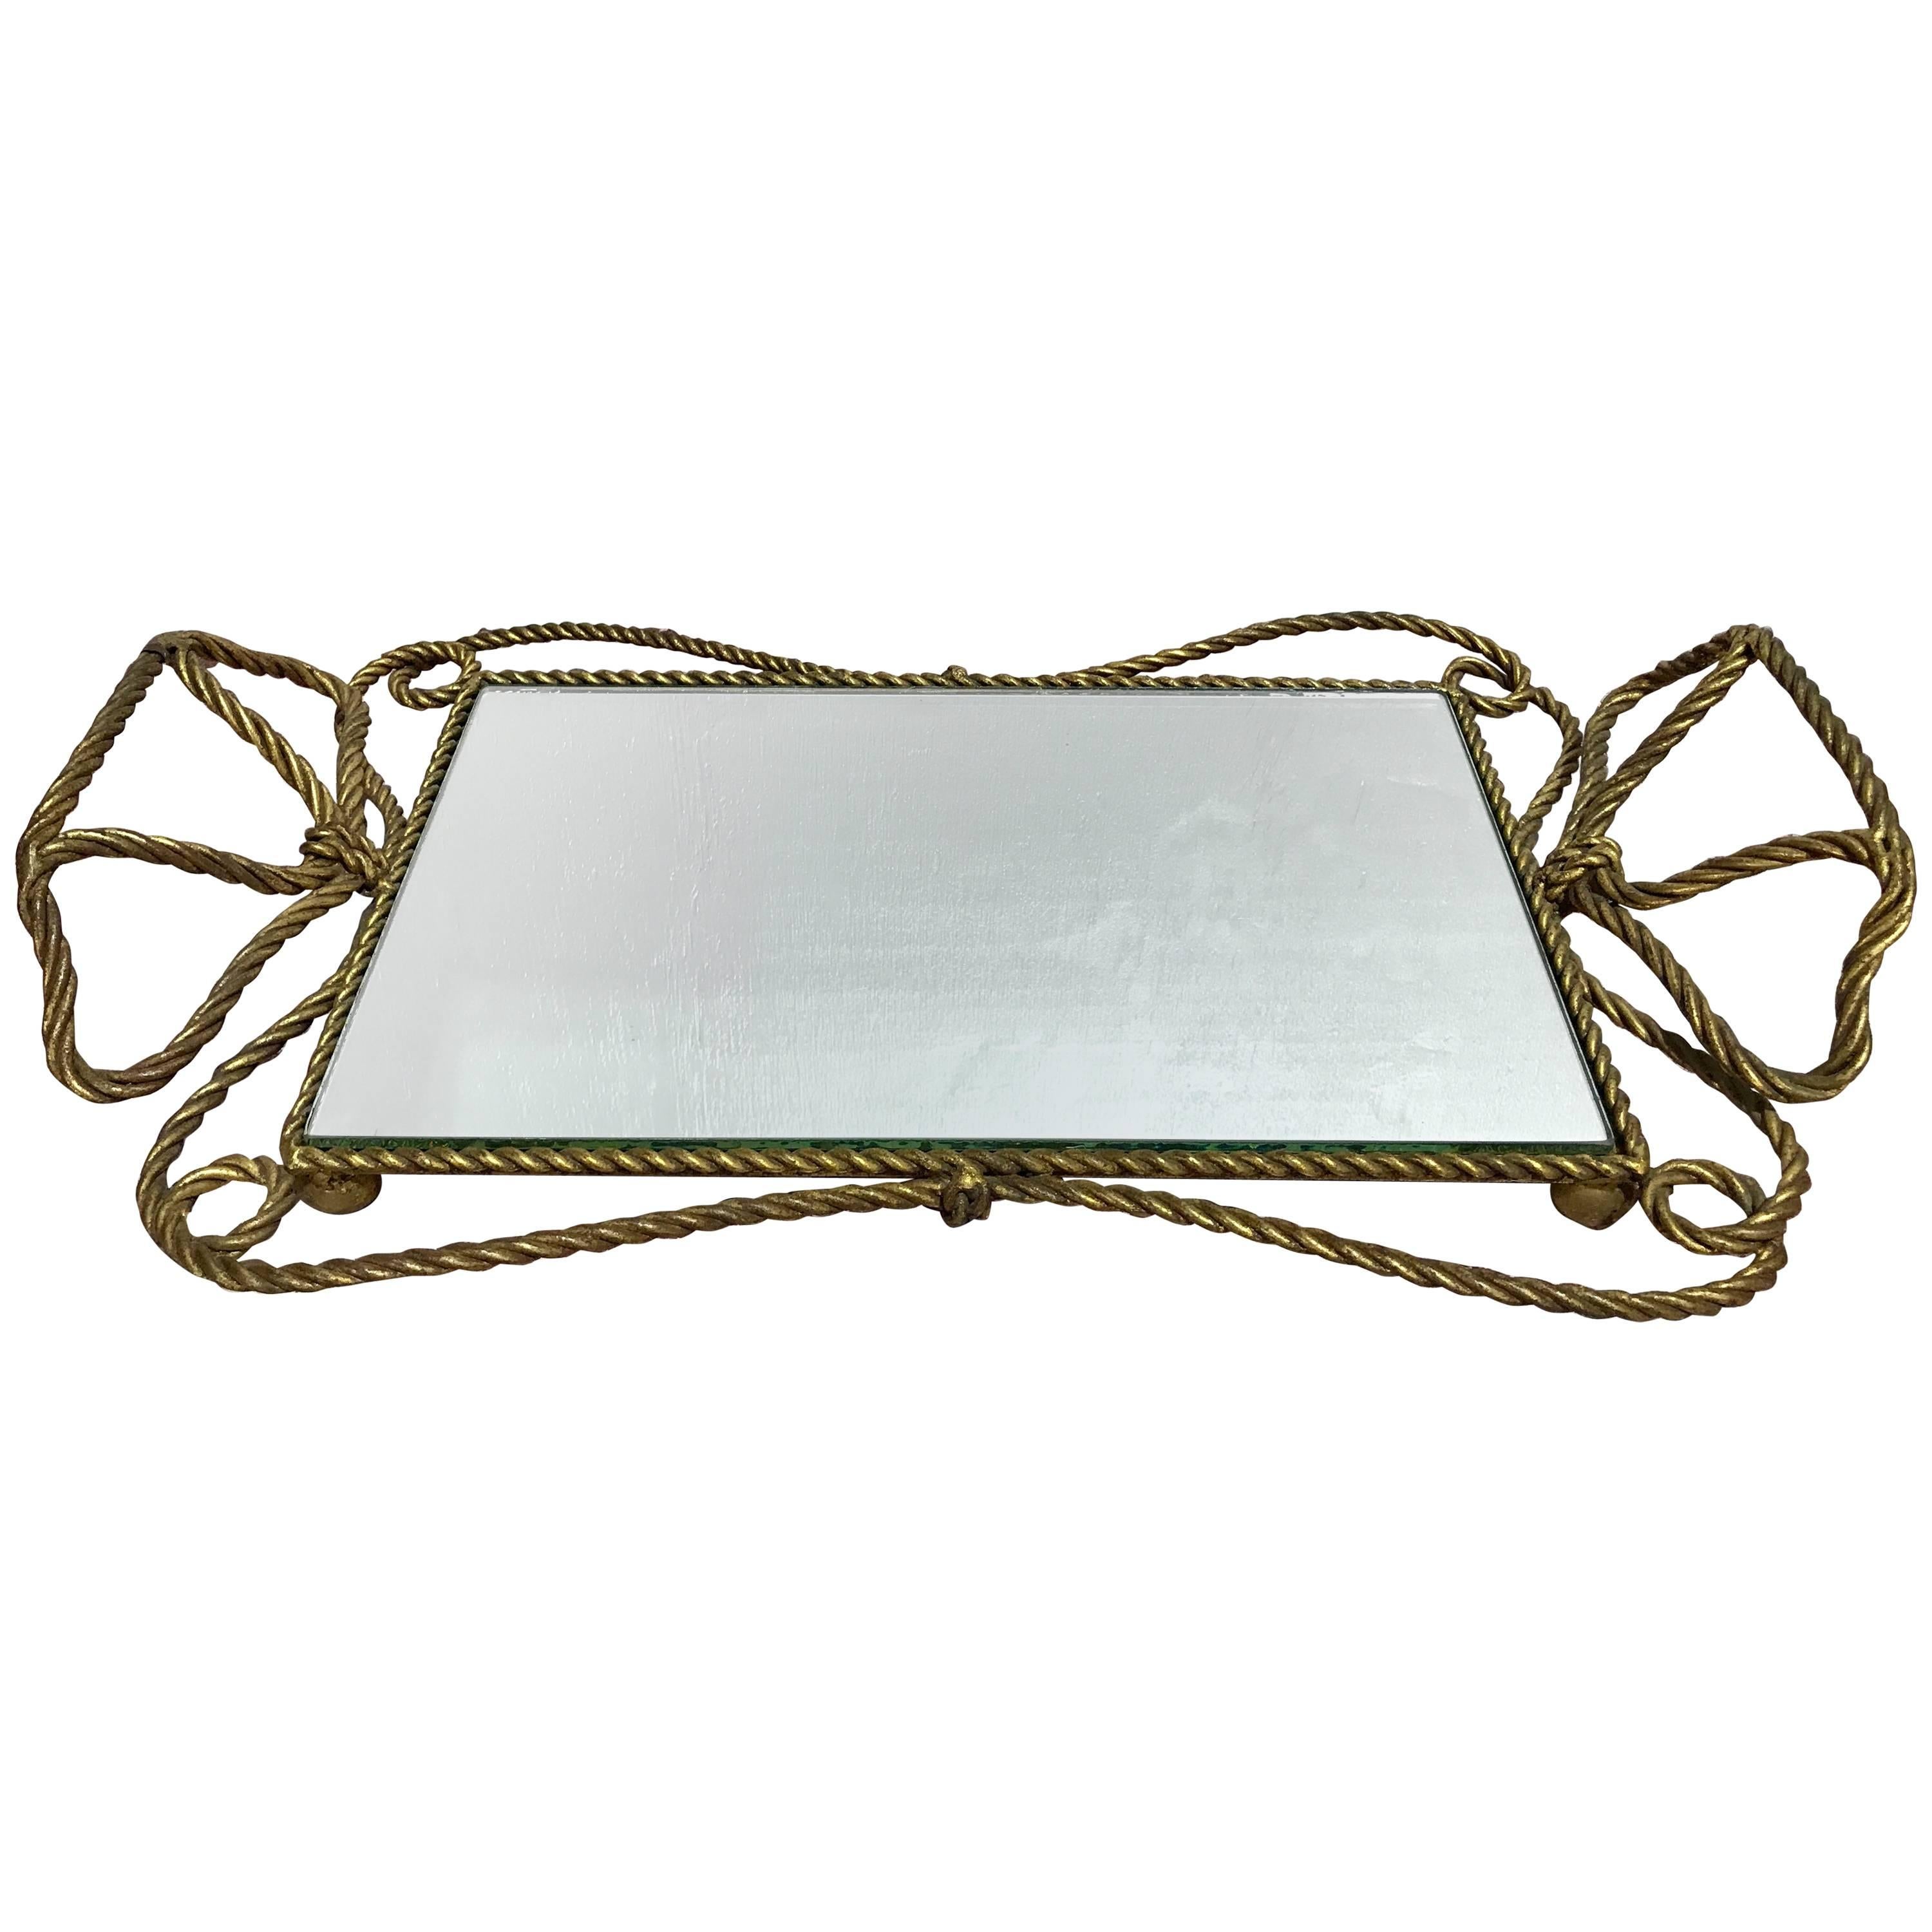 Italian Gilt Rope Motif Plateau or Vanity Tray For Sale